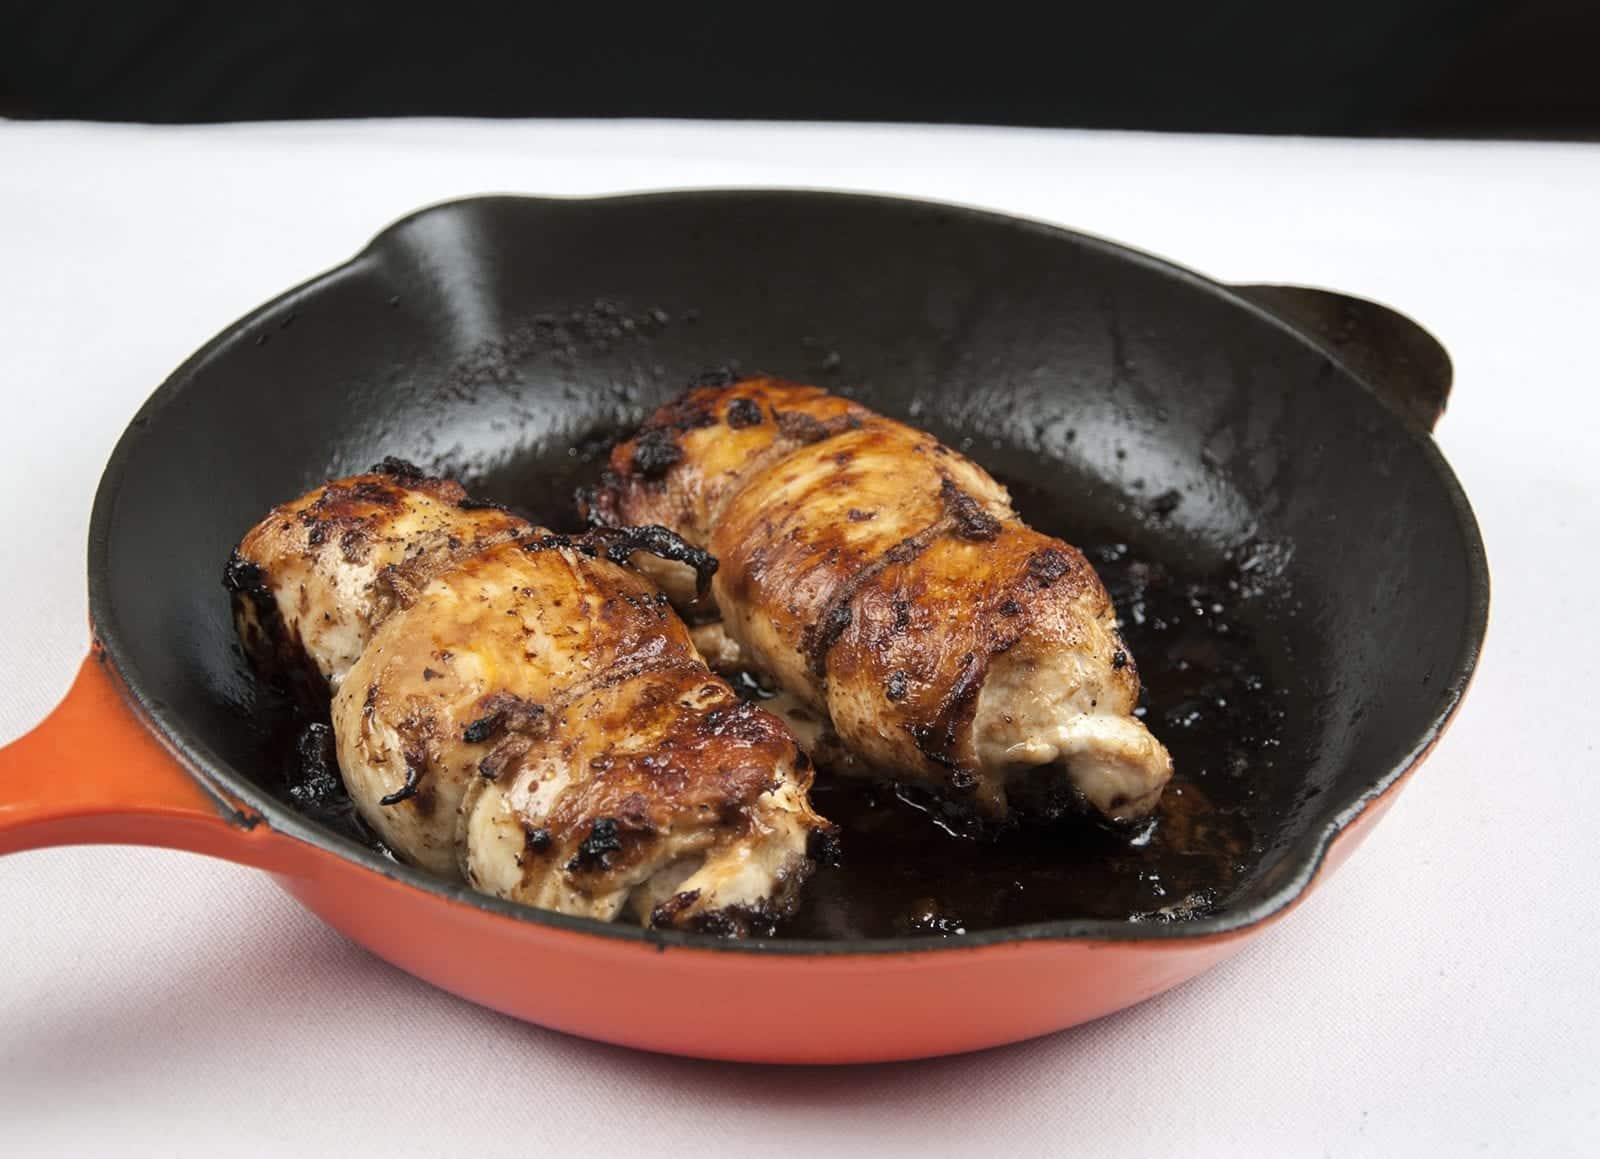 Succulent mushroom duxelle stuffed chicken breast. Pan-fried in a skillet and finished off in the oven. A wonderful, tasty and healthy chicken recipe. Yum! | theyumyumclub.com